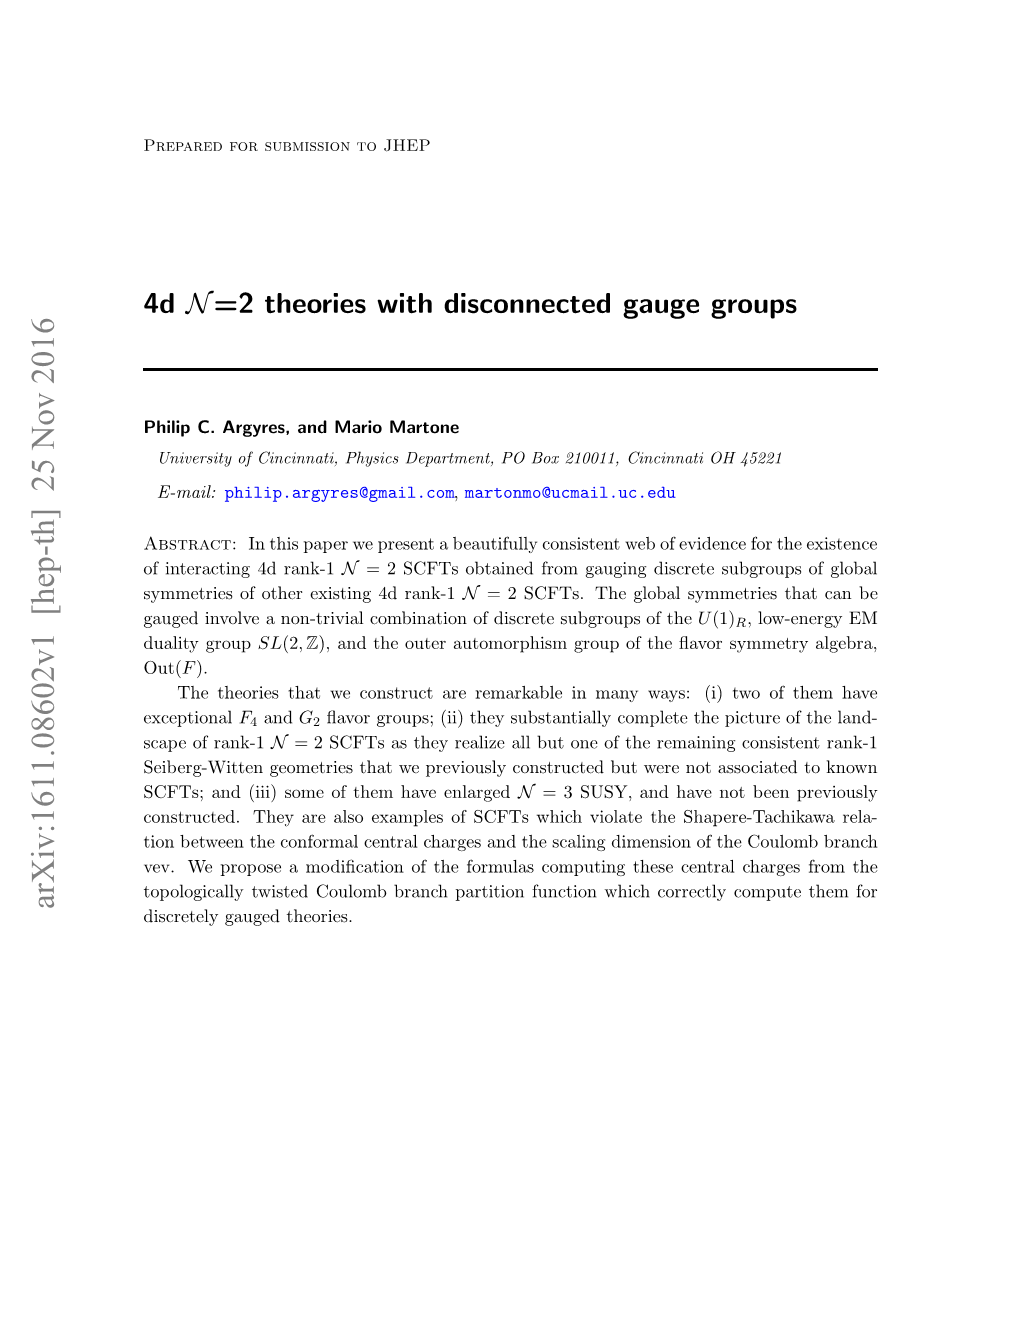 4D $\Mathcal {N} $= 2 Theories with Disconnected Gauge Groups